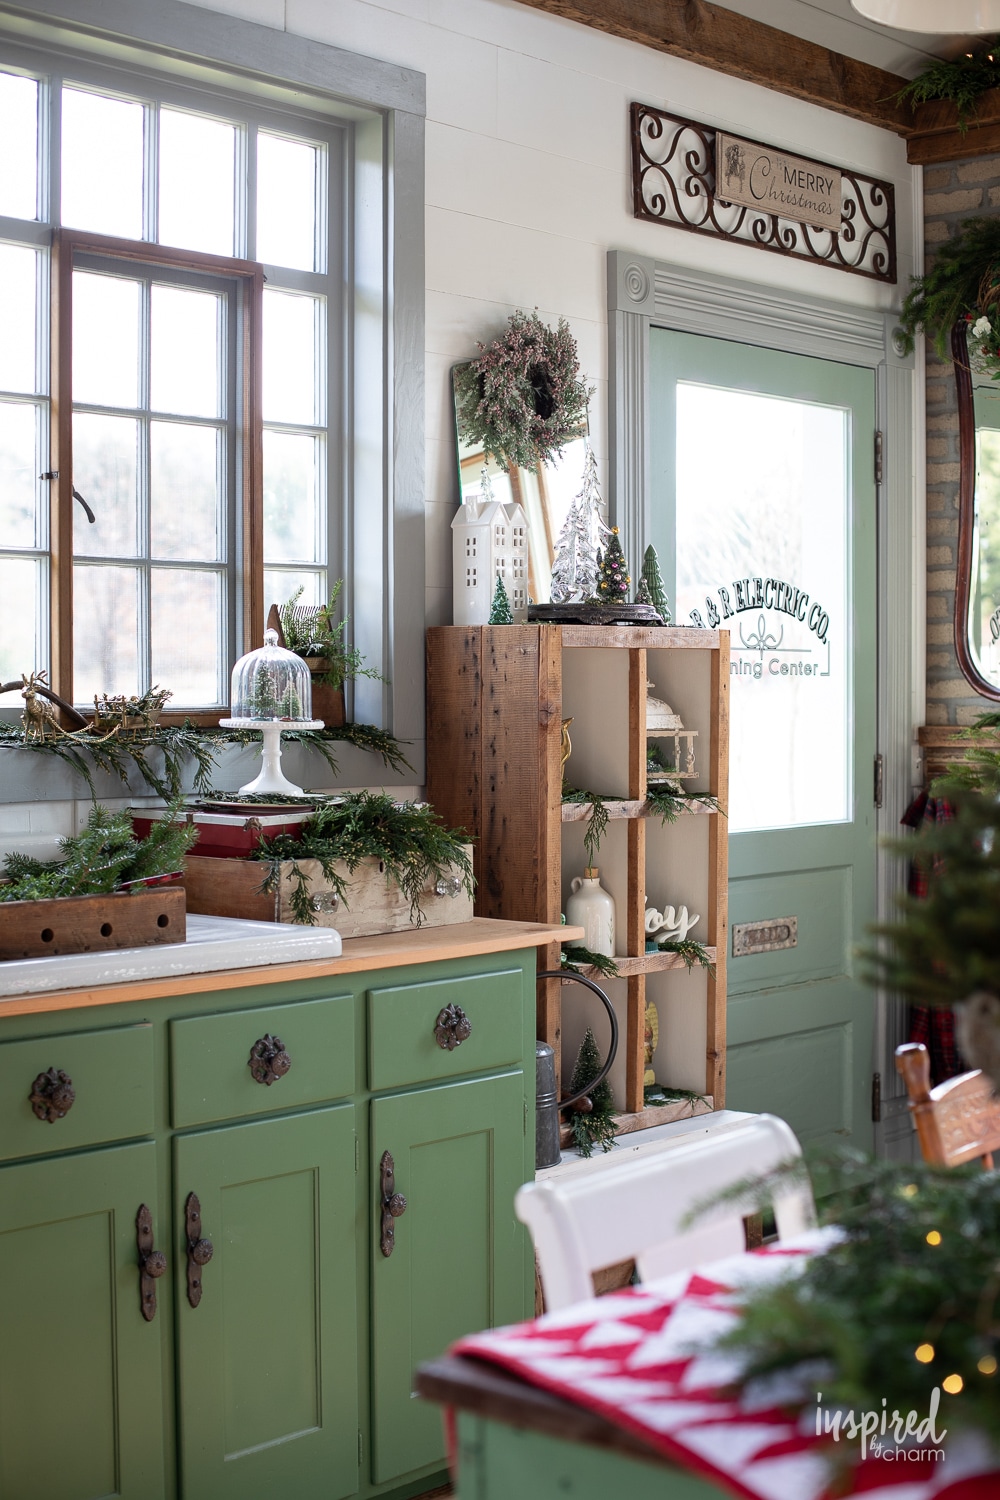 beautiful garden shed decorated for christmas.